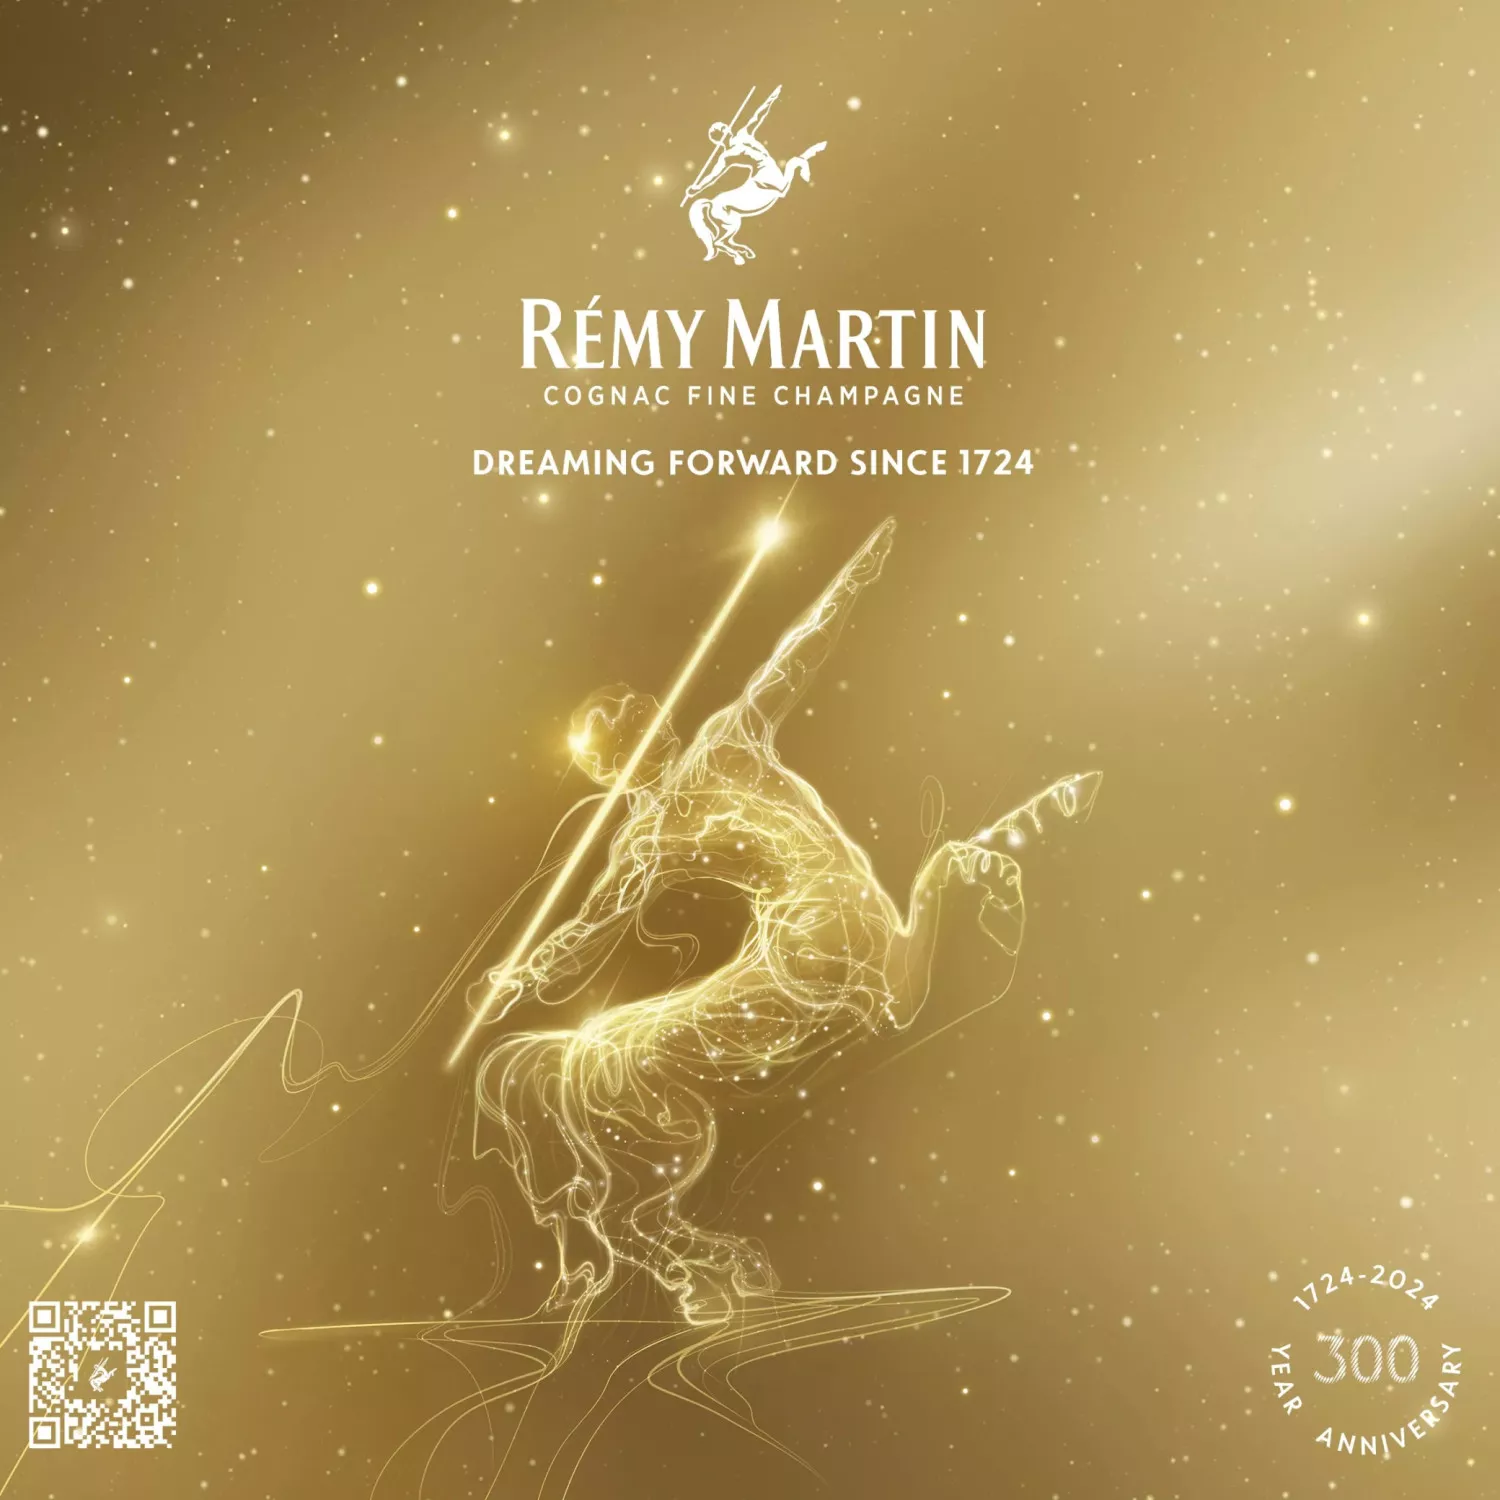 RÉMY MARTIN CELEBRATES ITS 300TH ANNIVERSARY AND UNVEILS A YEAR OF CELEBRATIONS ALL AROUND THE...